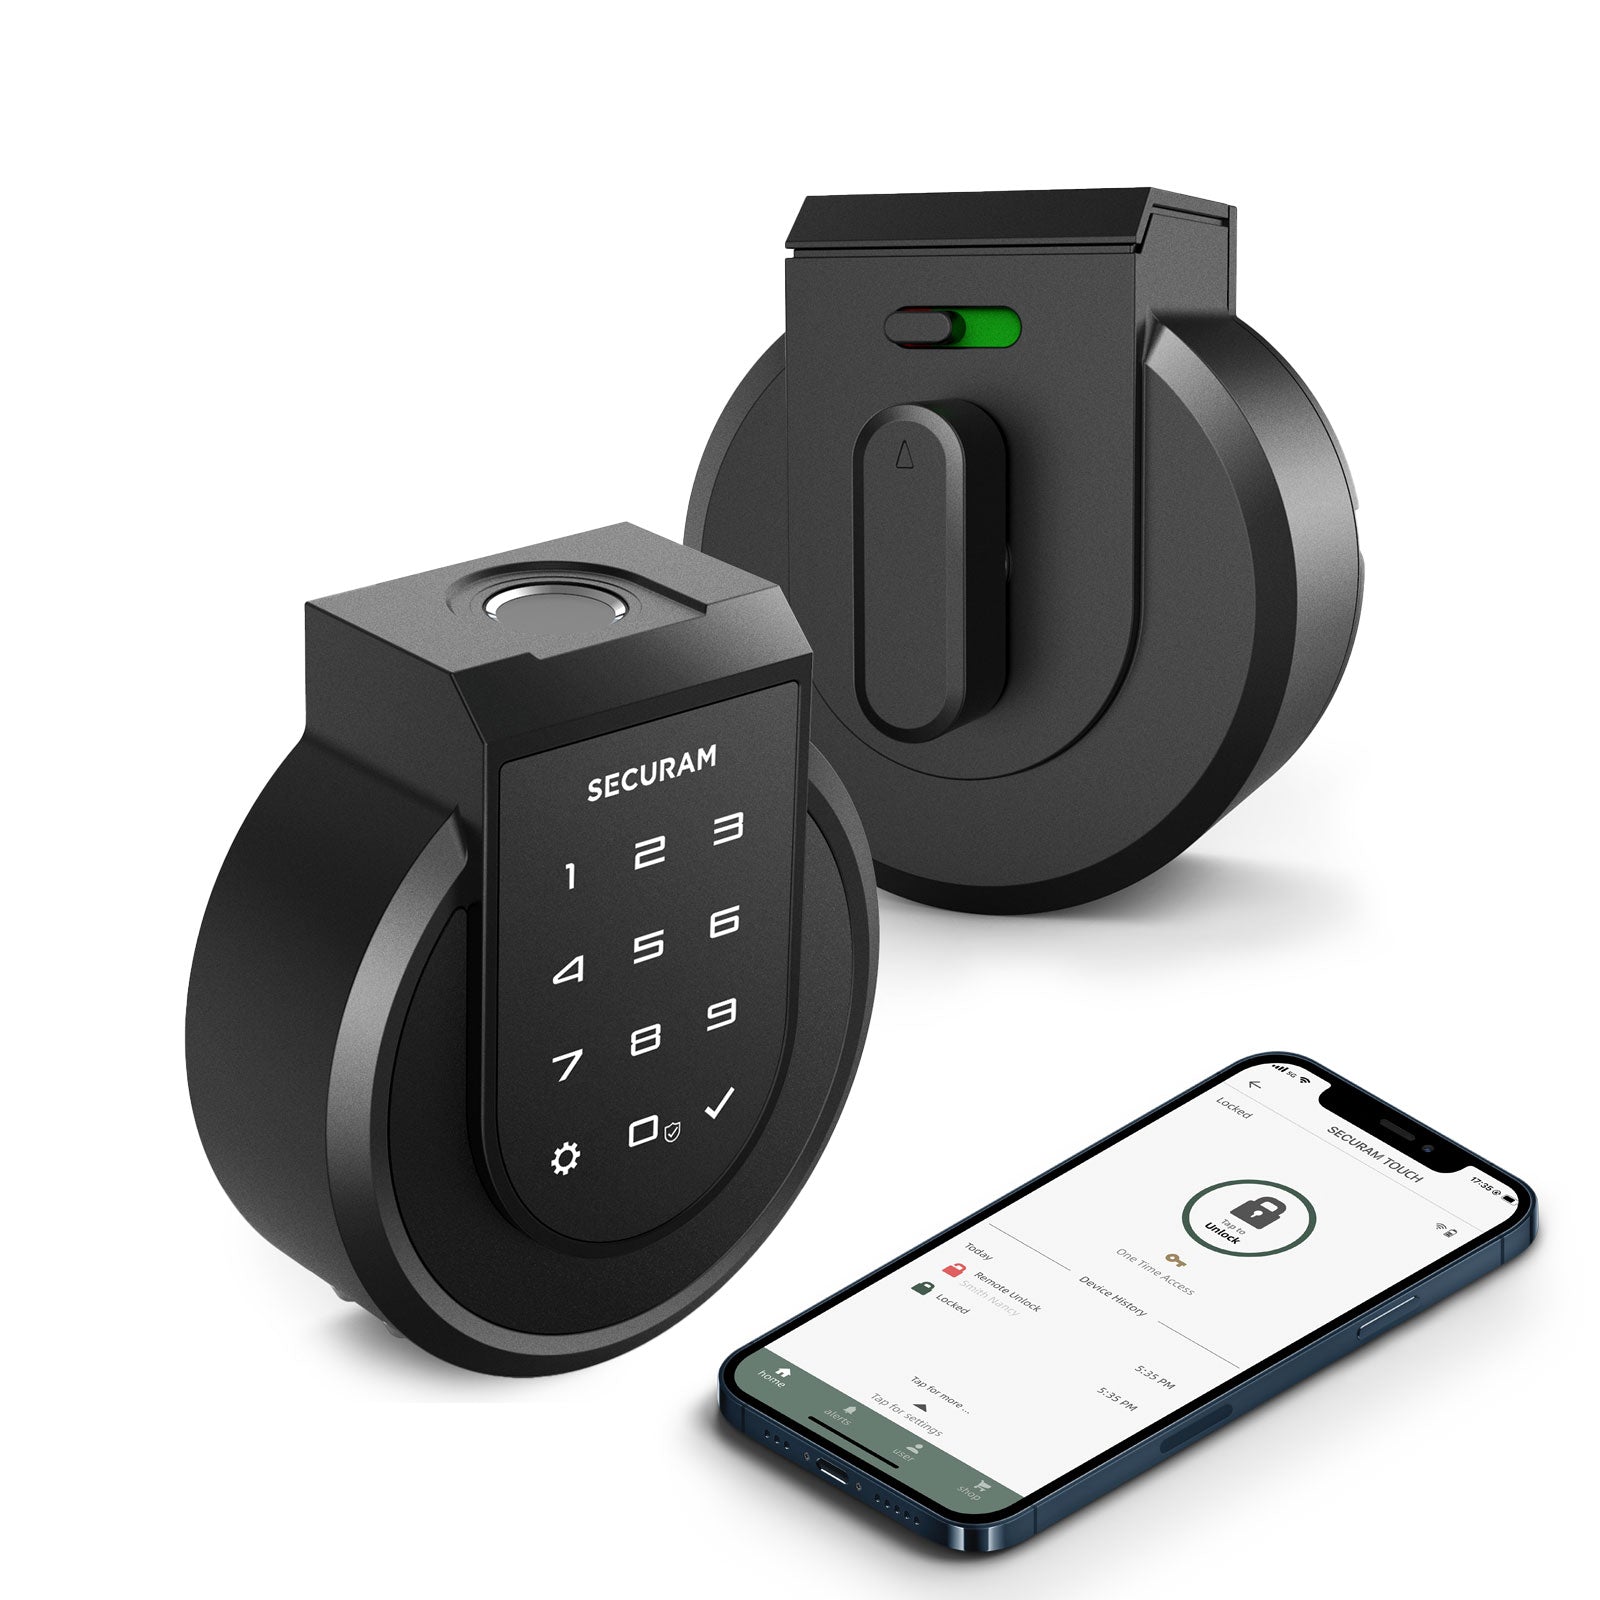 A SECURAM Touch - Fingerprint Smart Lock with a phone next to it.